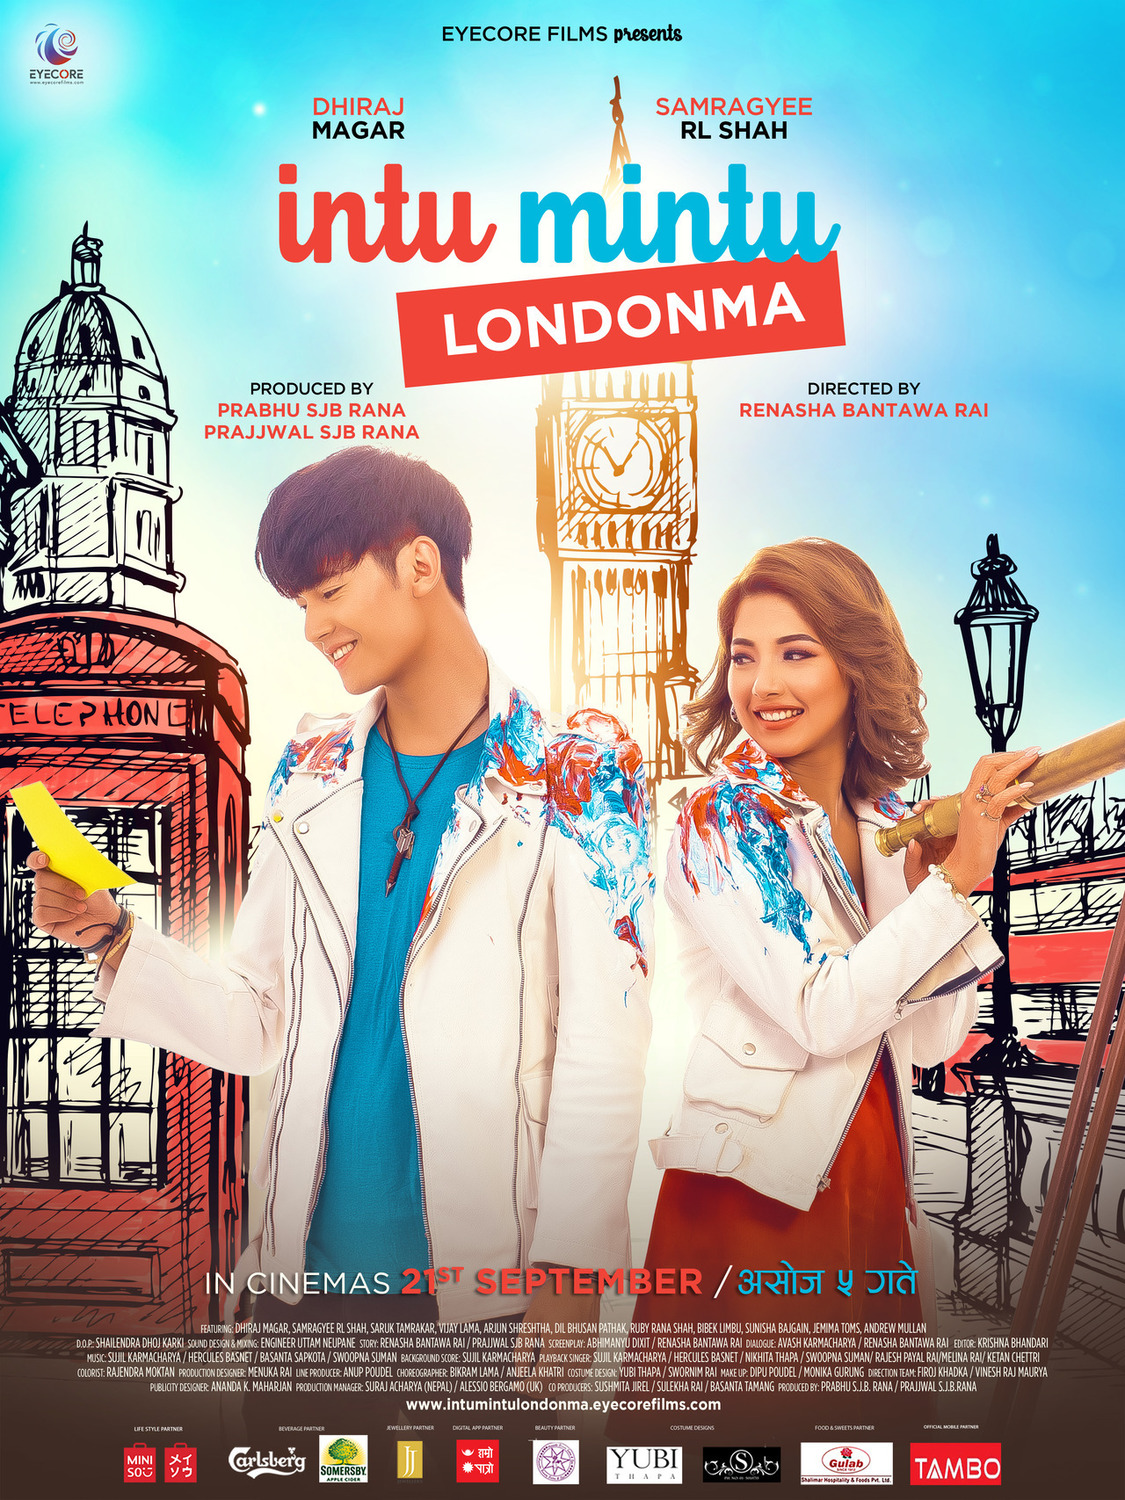 Extra Large Movie Poster Image for Intu Mintu Londonma (#7 of 11)